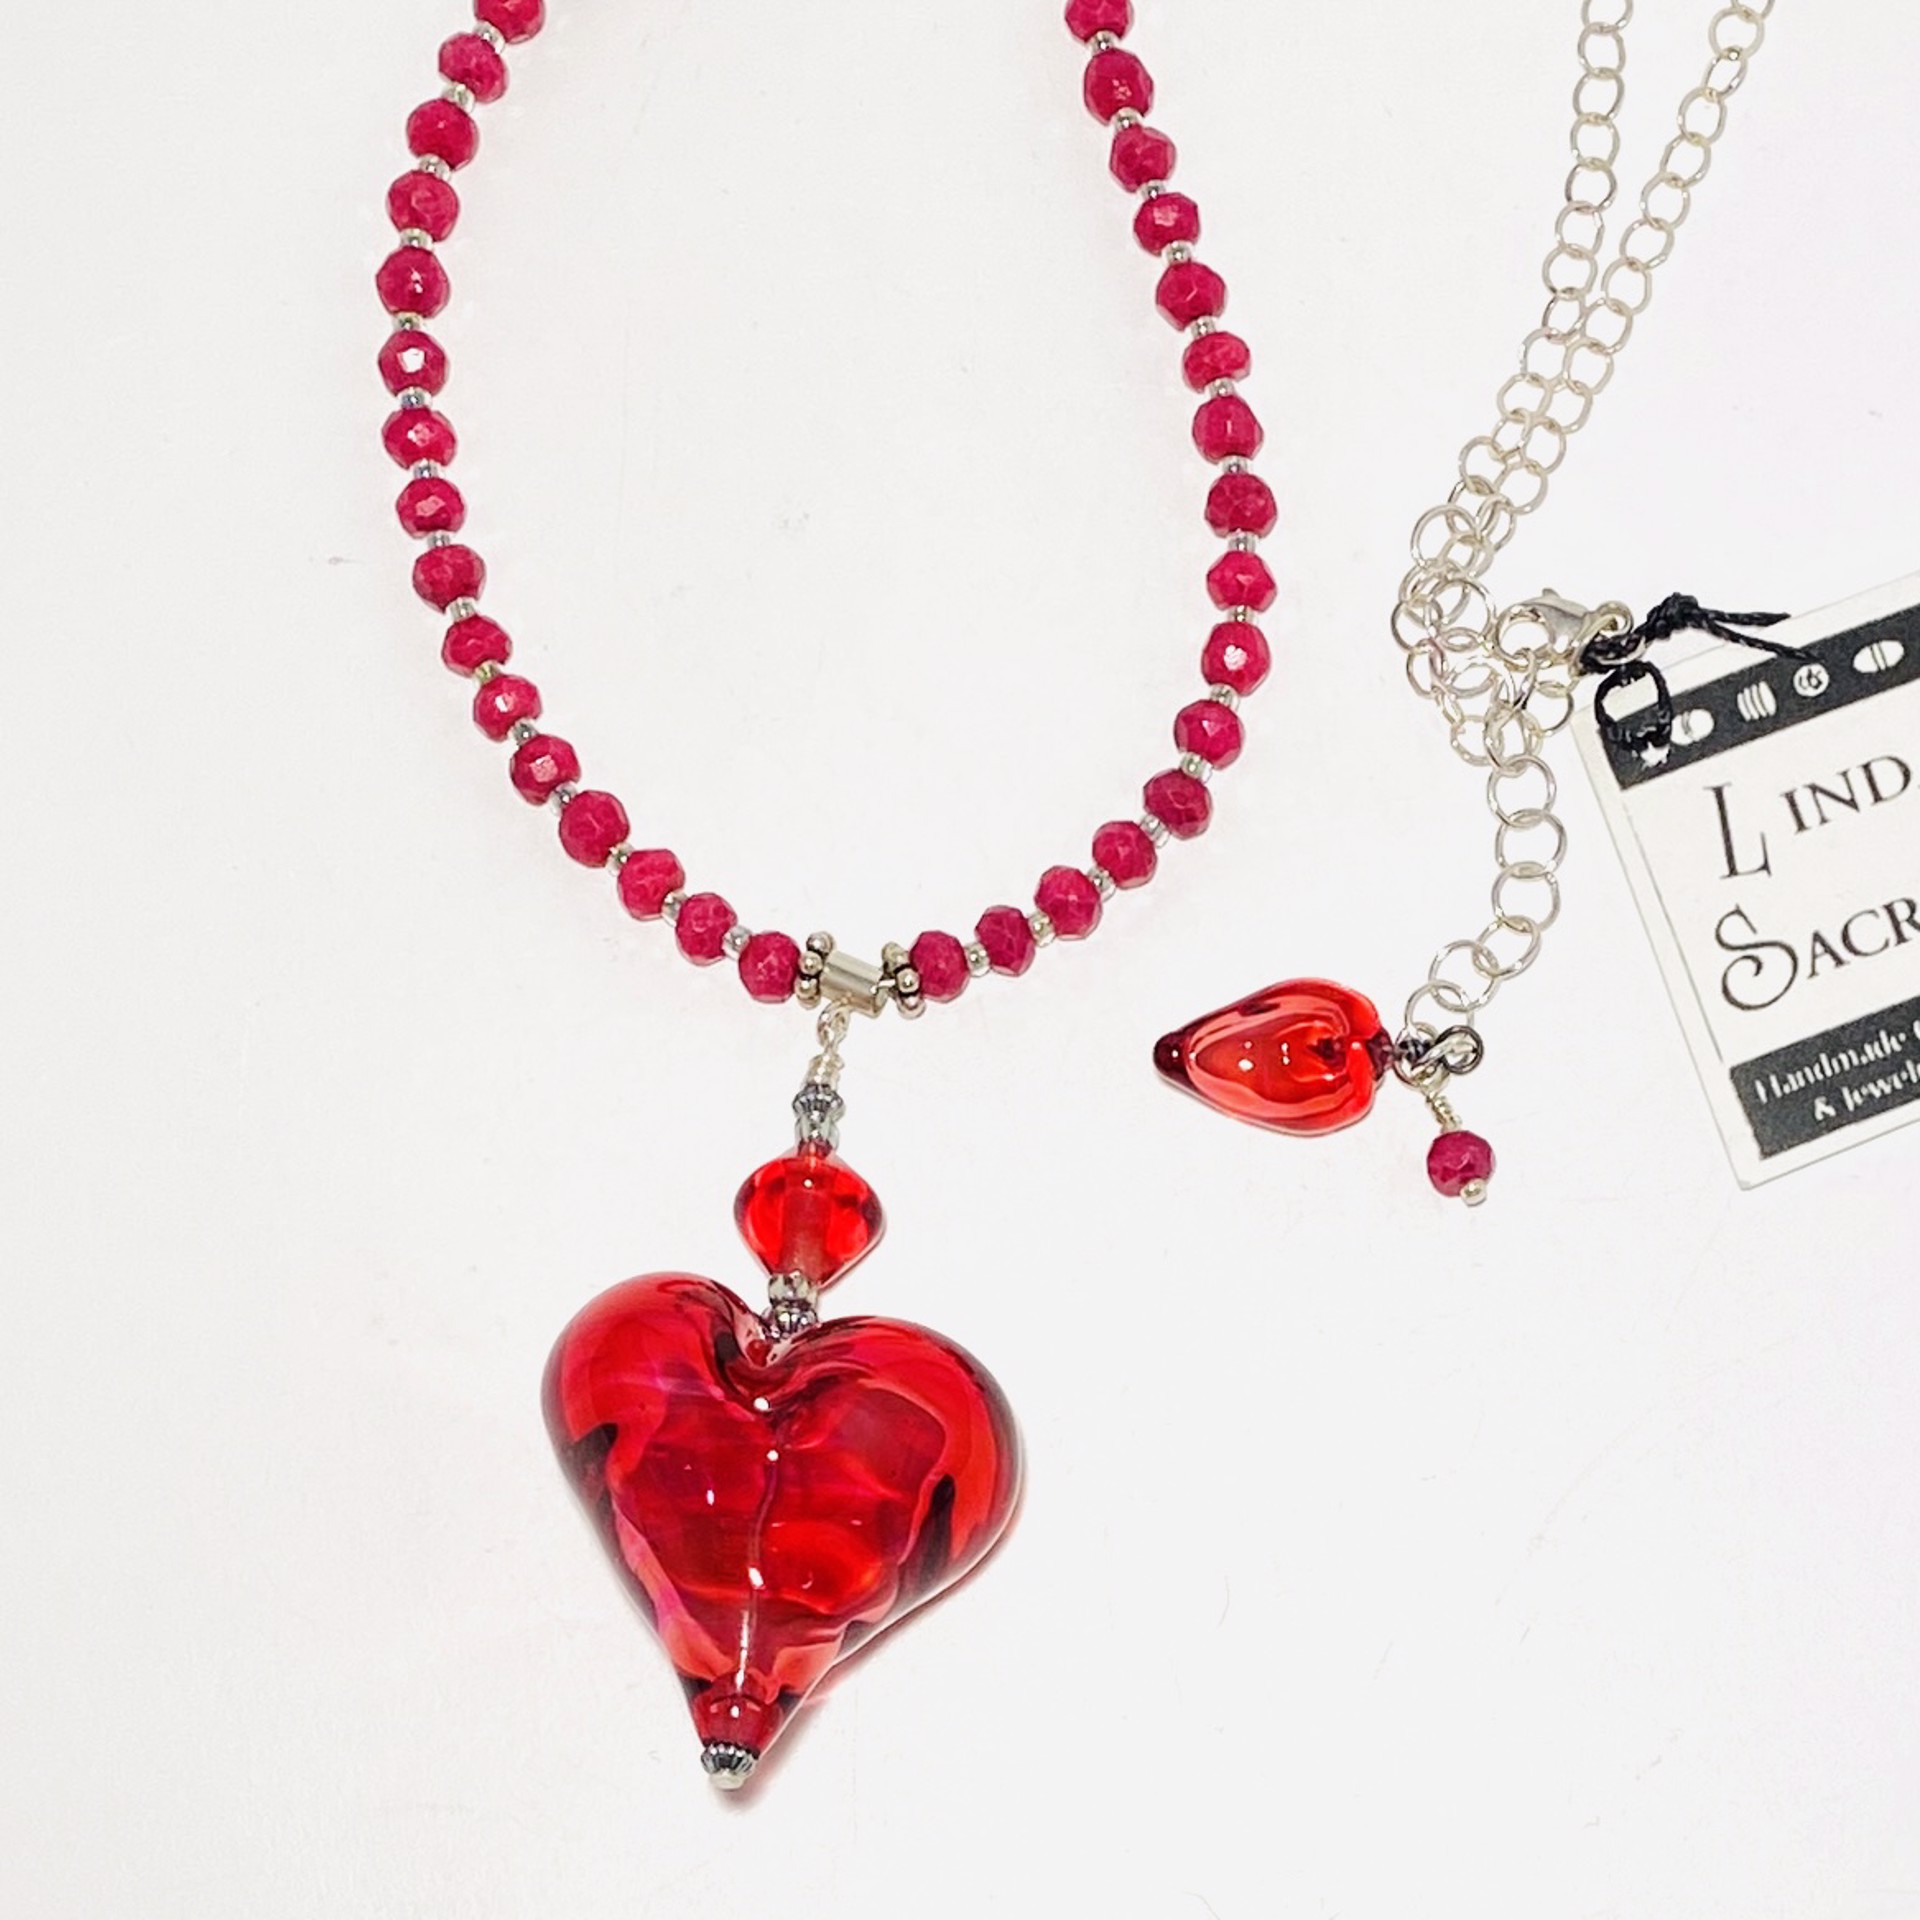 Ruby Gold Hollow Built Heart Faceted Ruby Bead and Sterling Chain Necklace by Linda Sacra